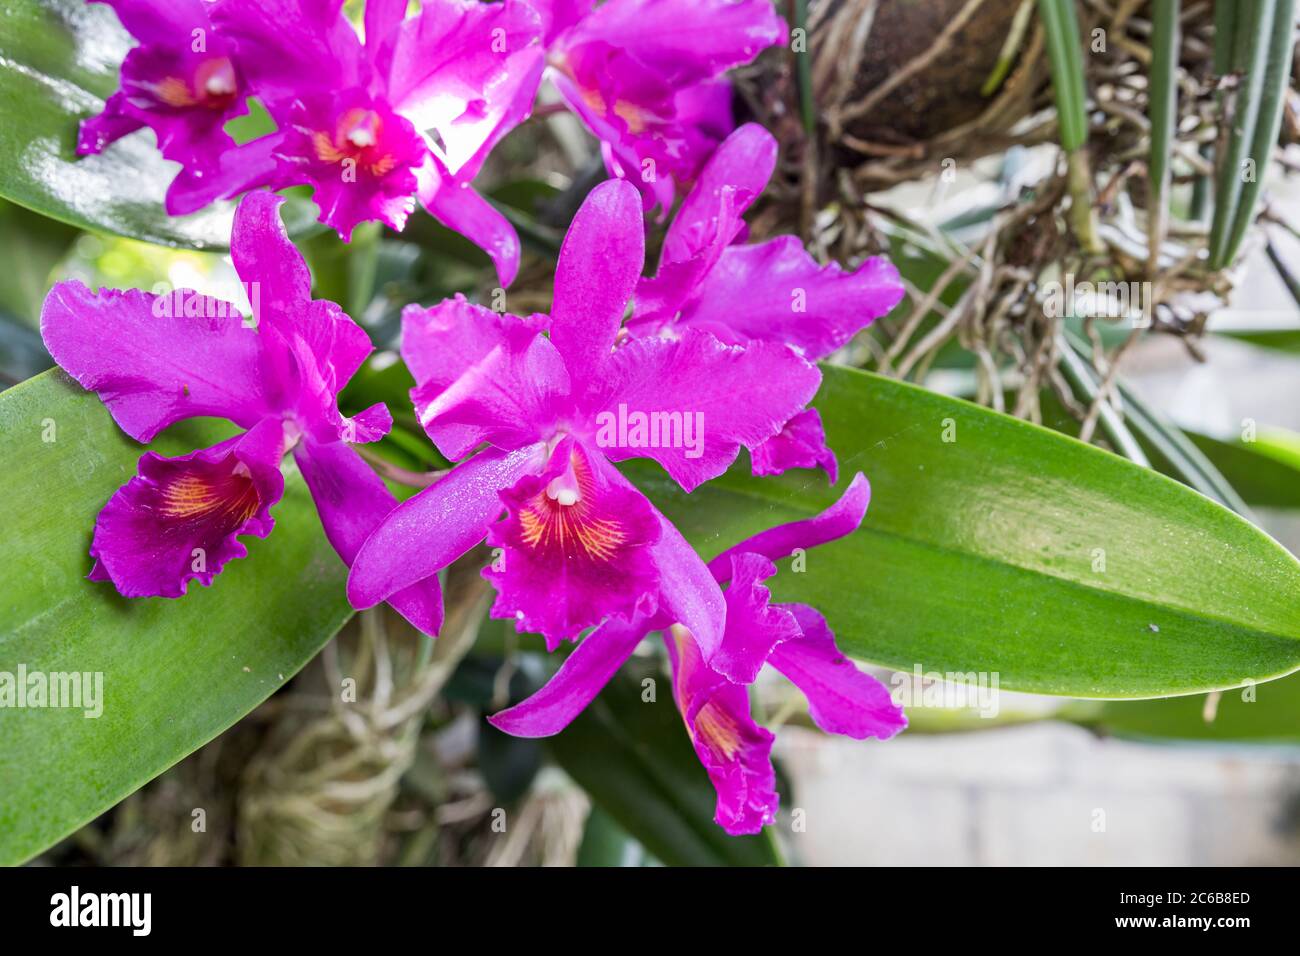 Guarianthe skinneri is the national flower of Costa Rica, where it is known as guaria morada. It was referenced as Cattleya skinneri Stock Photo